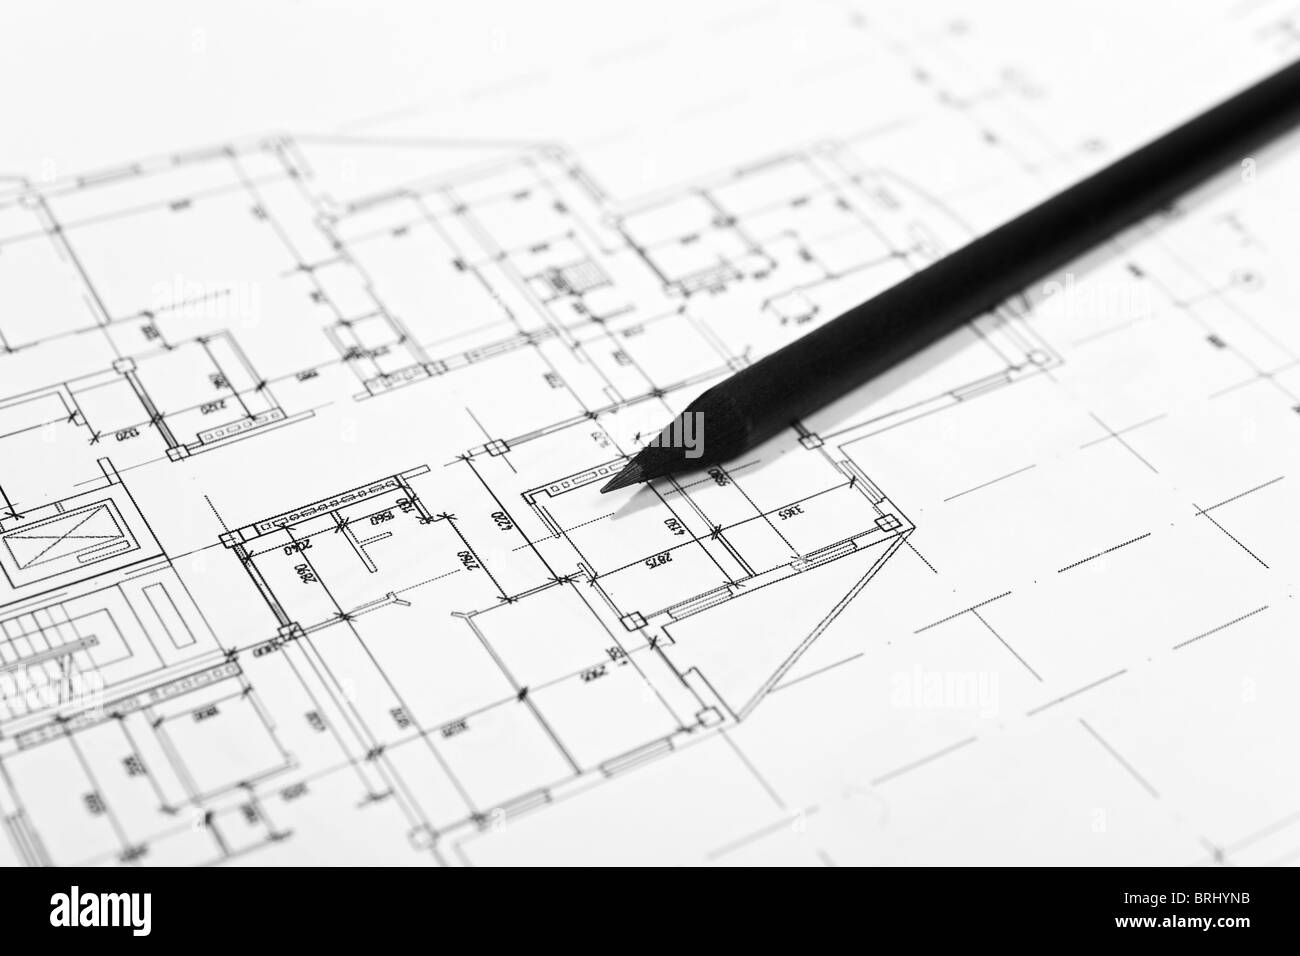 plans for residential flats with pencil closeup Stock Photo